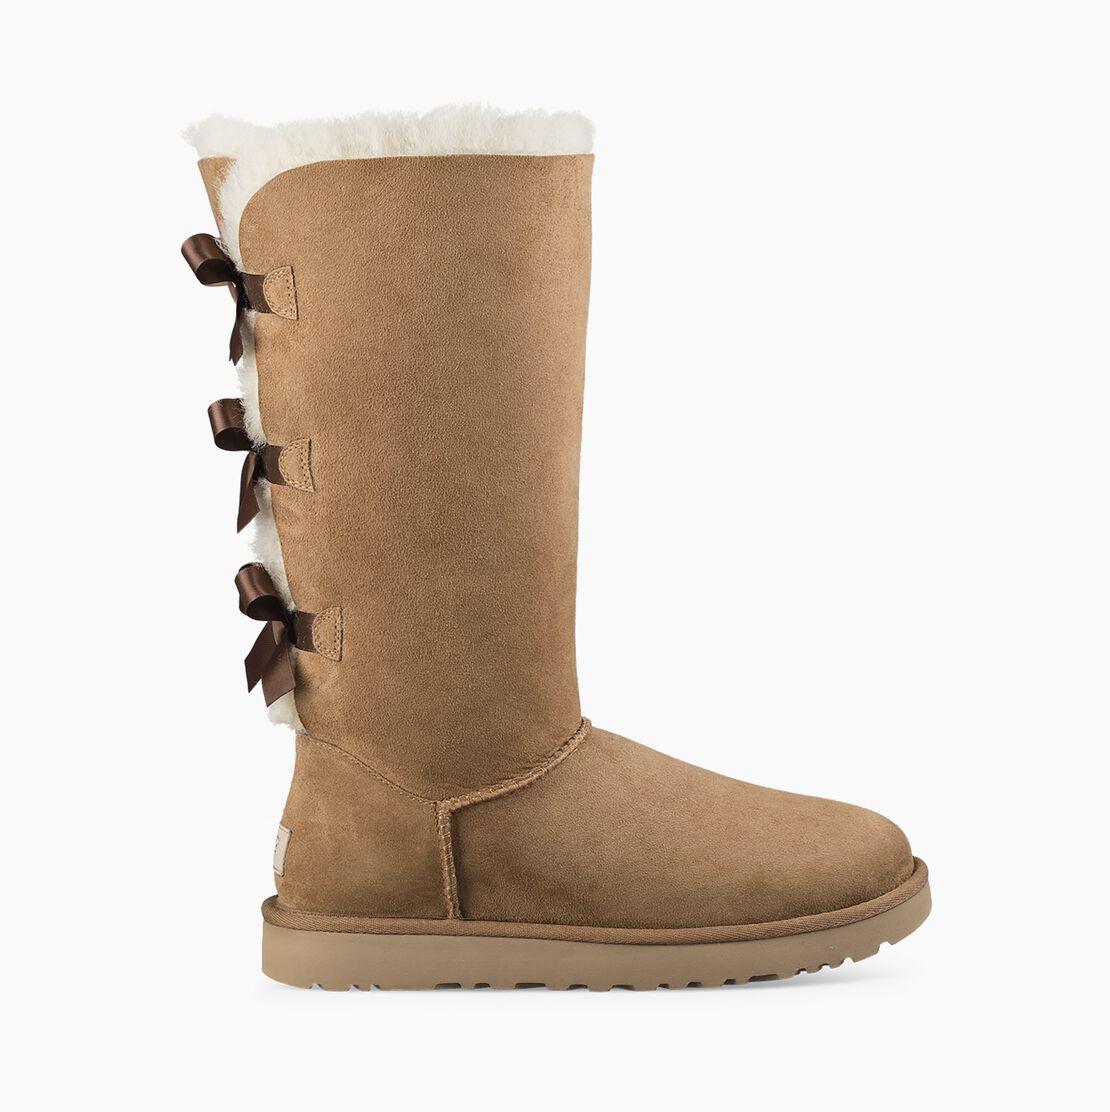 US$ 38.40 - Bailey Bow Tall II Boot - m.ugg-outlets.store